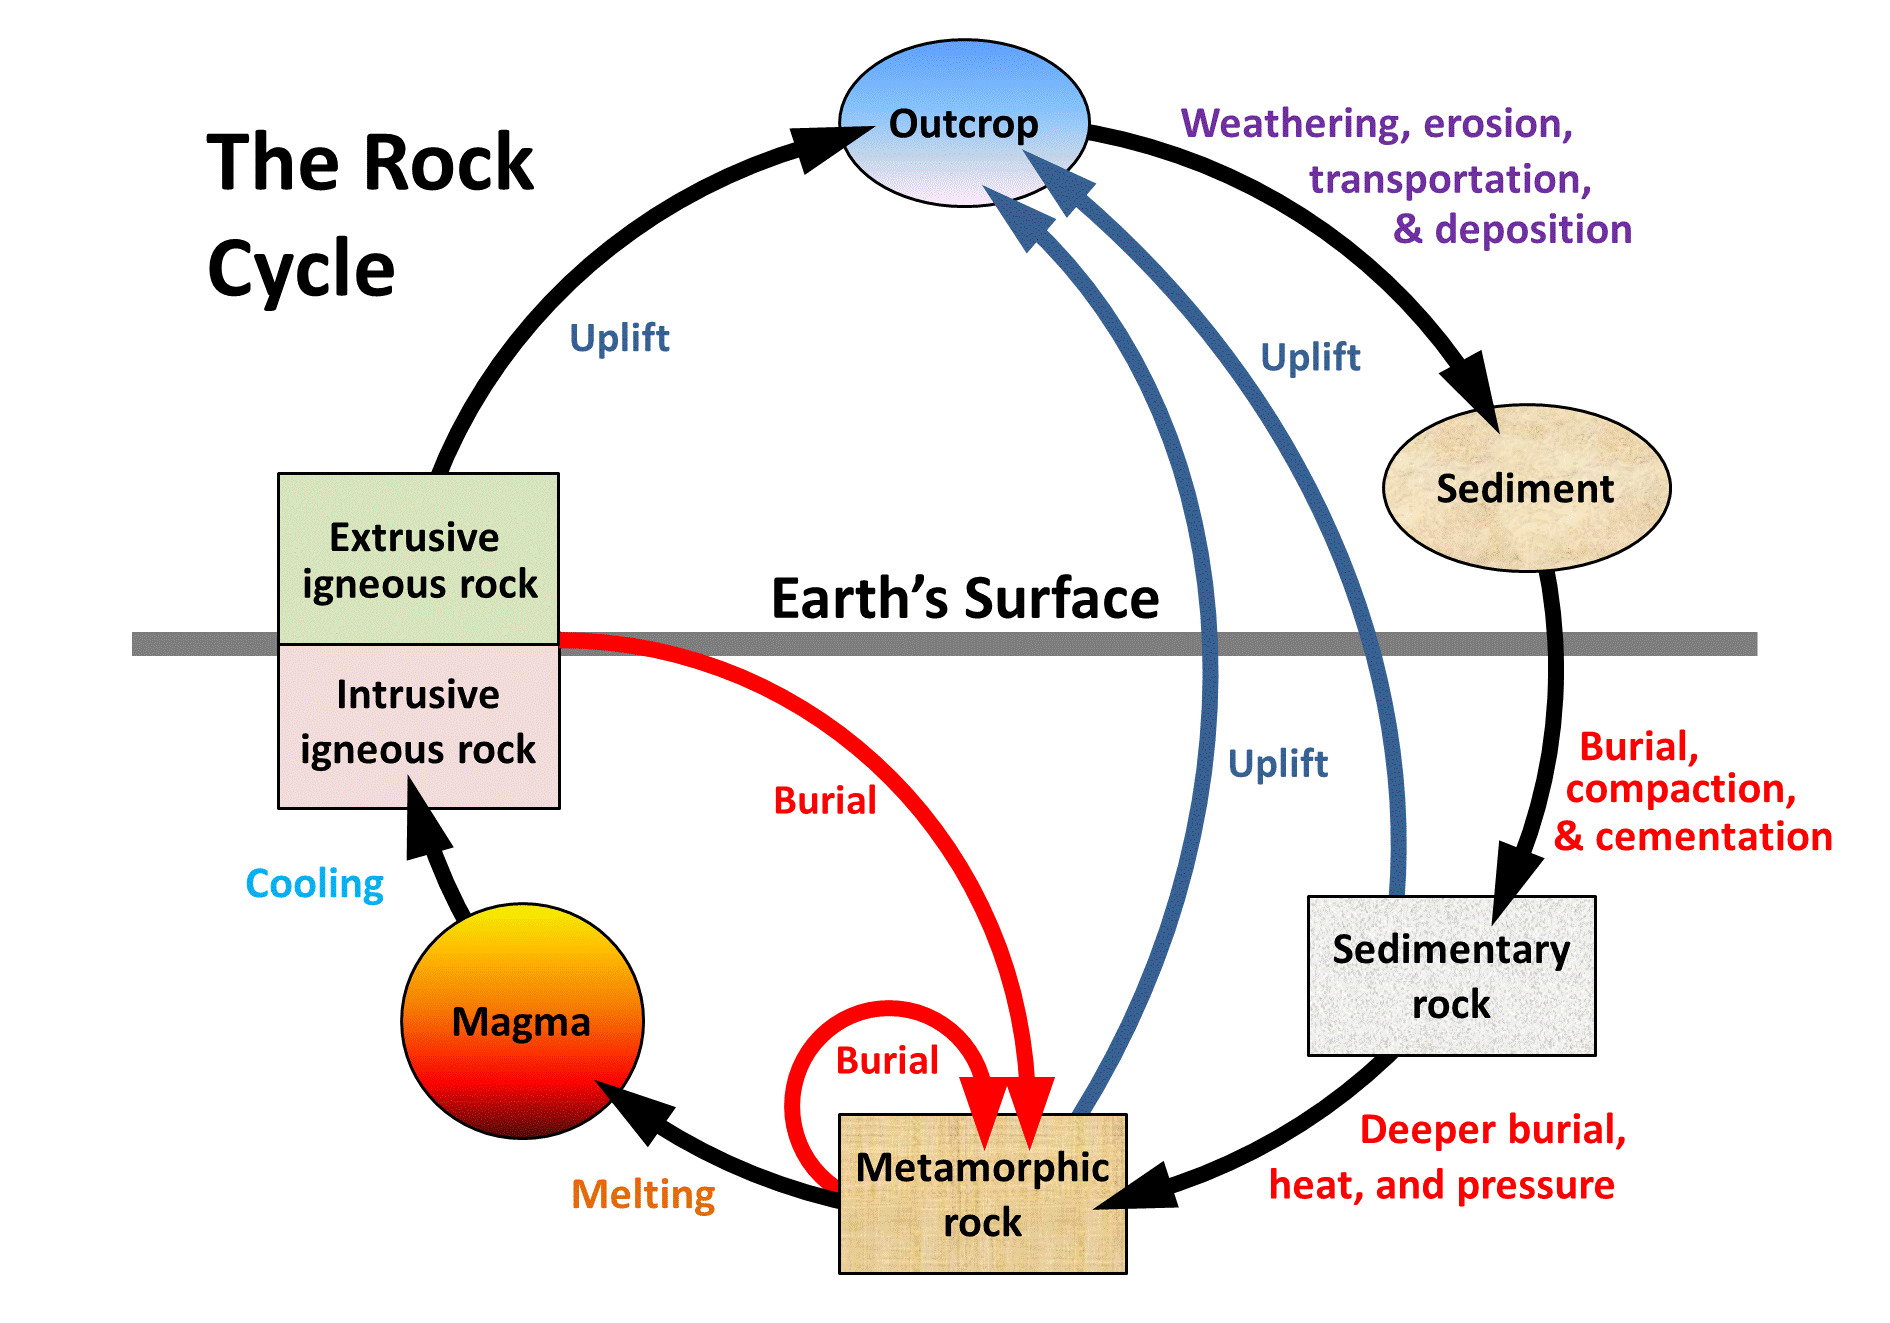 Figure 6.3.1: A schematic view of the rock cycle. Image description available.